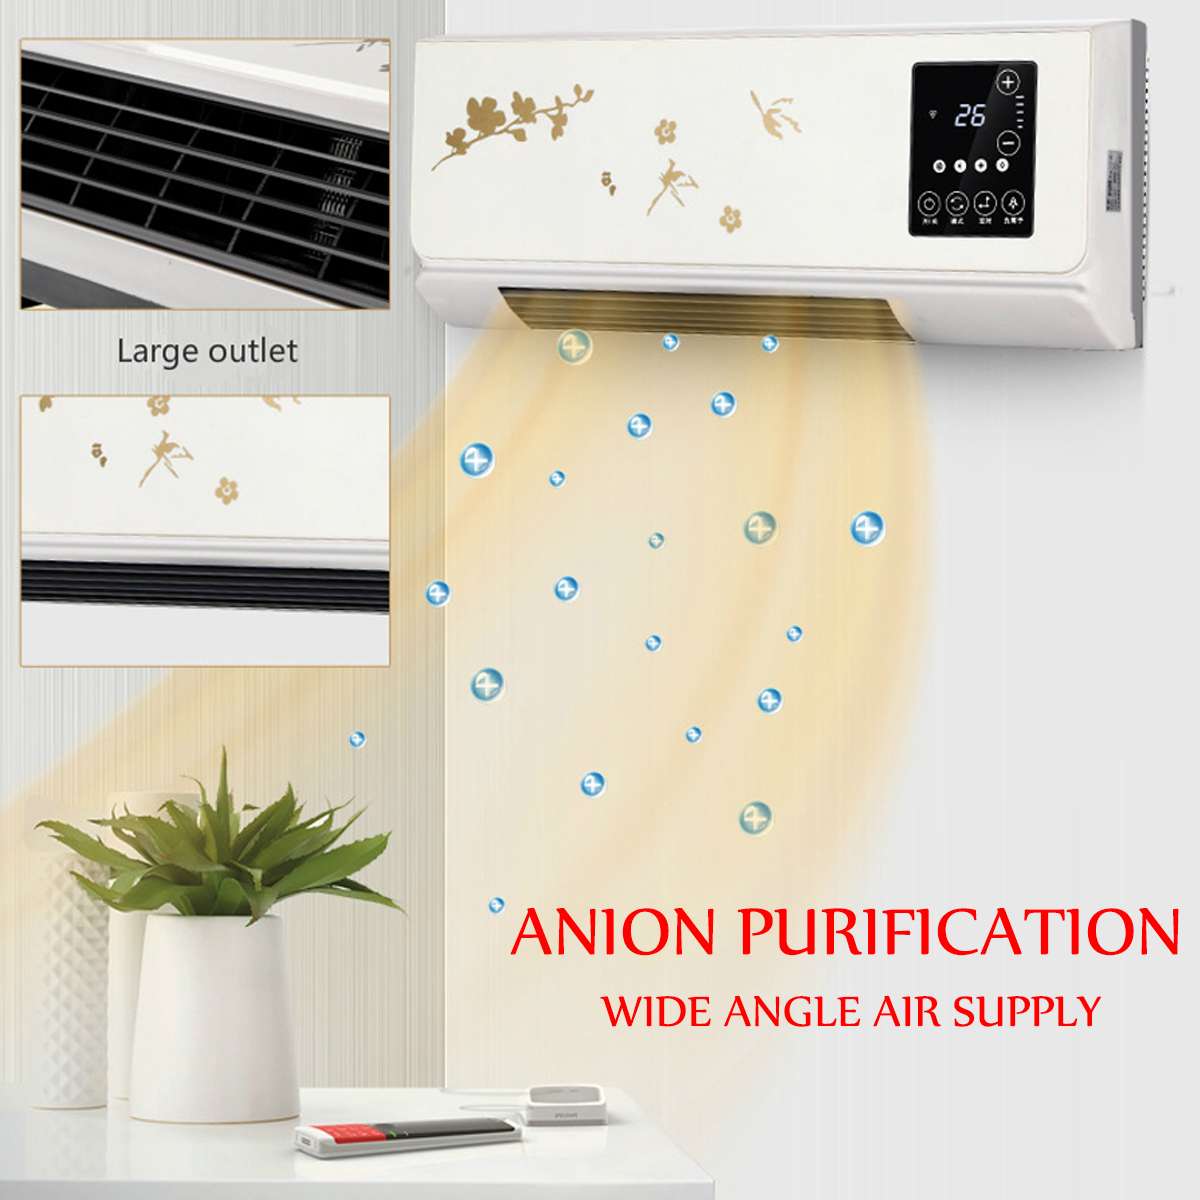 2000W Wall Mounted Electric Air Conditioner Heater Fan Heating 3S Heating Room Bathroom Waterproof With Remote Control/Hanger